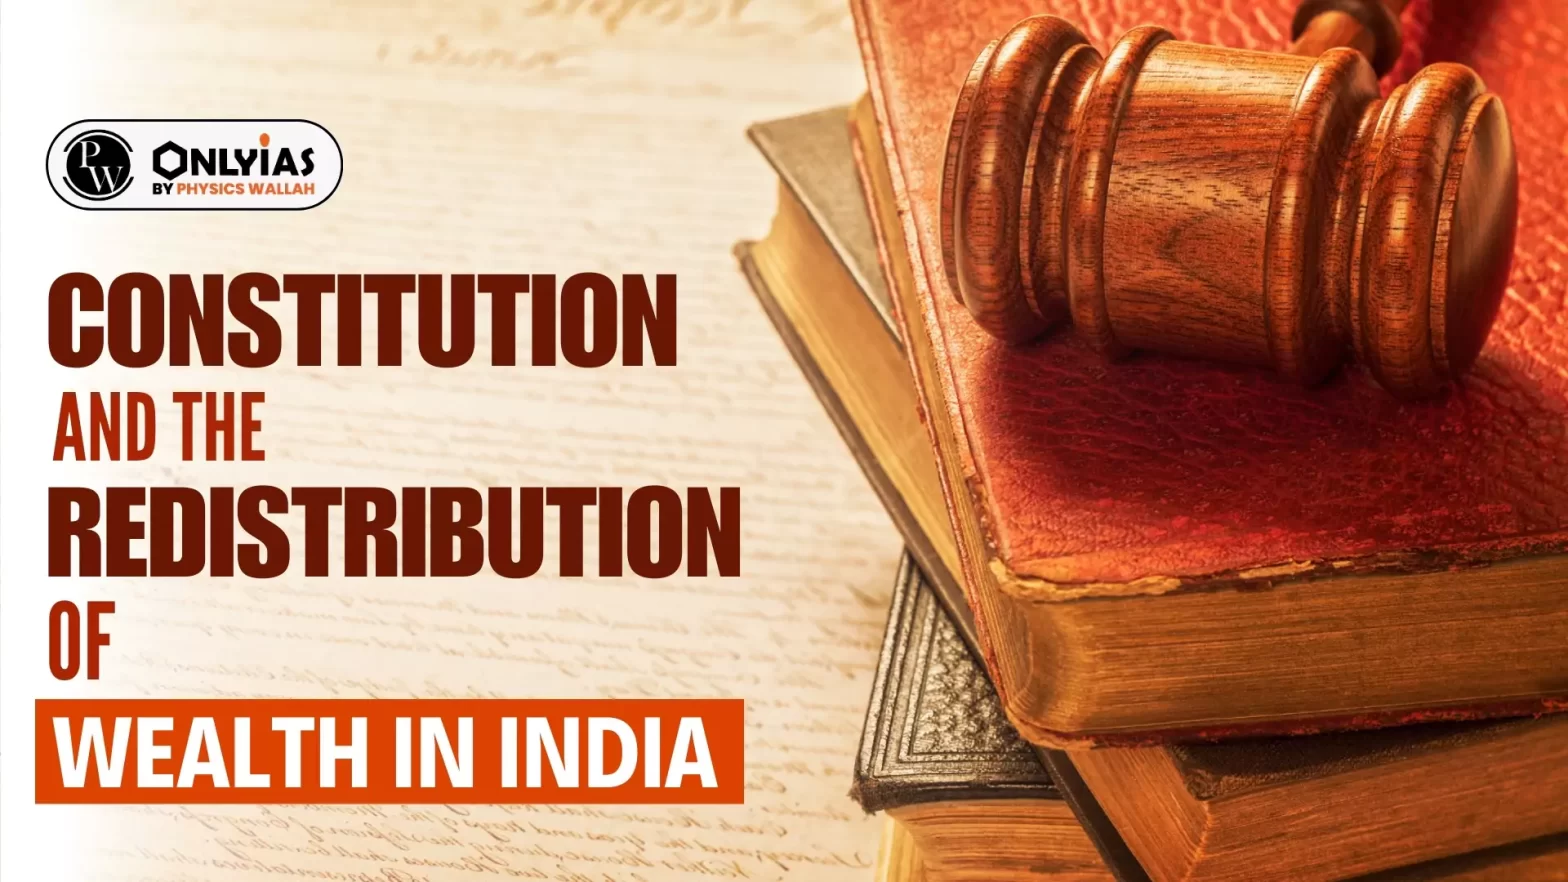 Constitution & the Redistribution of Wealth in India